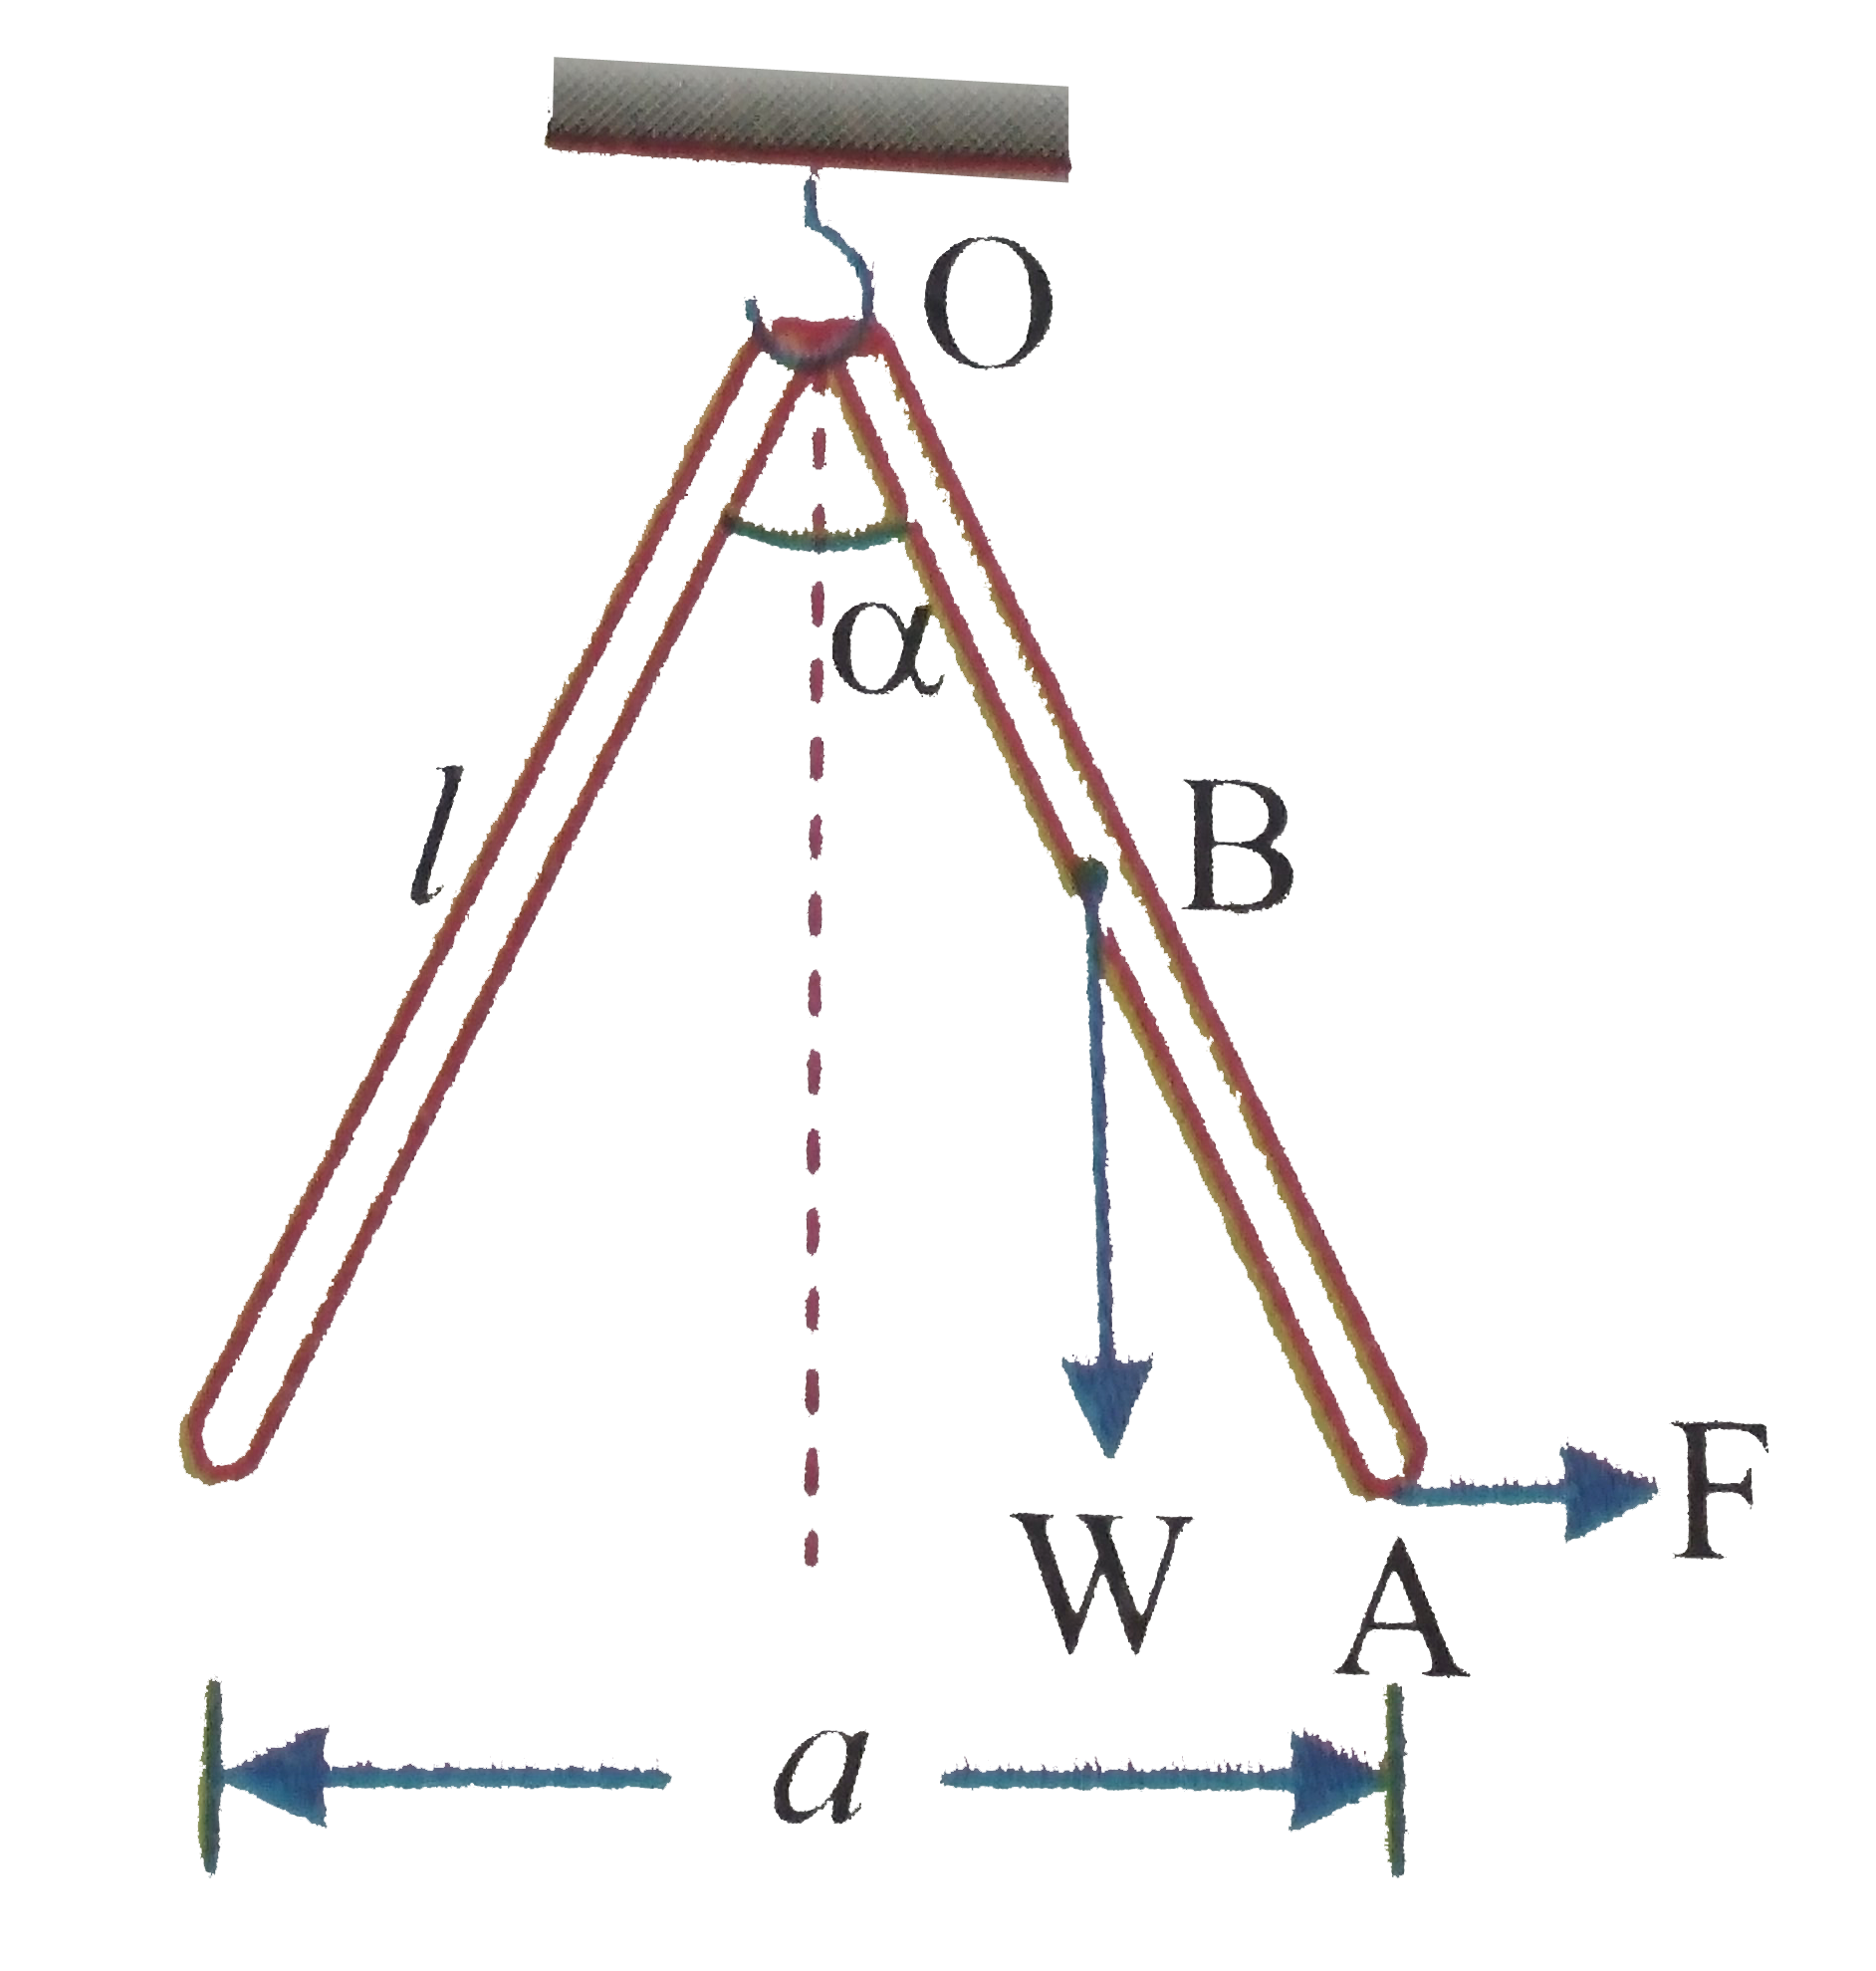 Two long equally magnetized needles are freely suspended by their like poles form a hooks shown in figure. The length of each needle is l cm and the weight  is W. in equillibrium the needles make an angle alpha with each other. The magnetic pole strength is concentrated at the ends of needles. The magnetic pole strength of the needles is